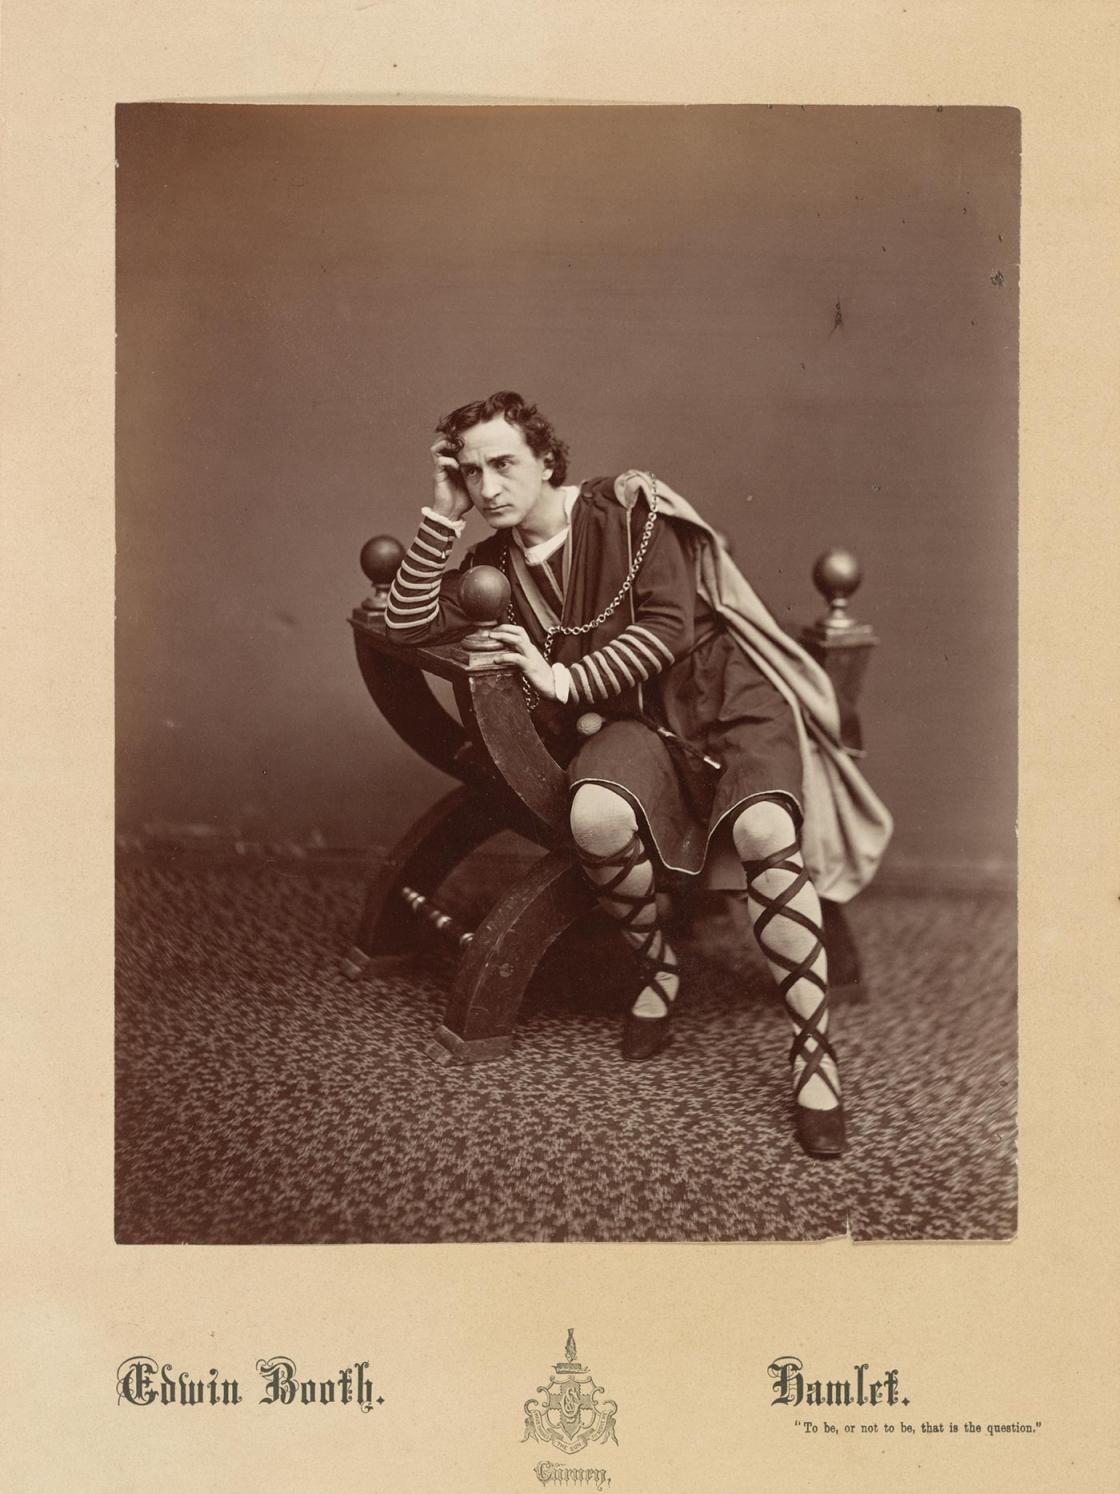 19th century sepia portrait of an actor with elaborate shoes and cape leaning on a unique chair